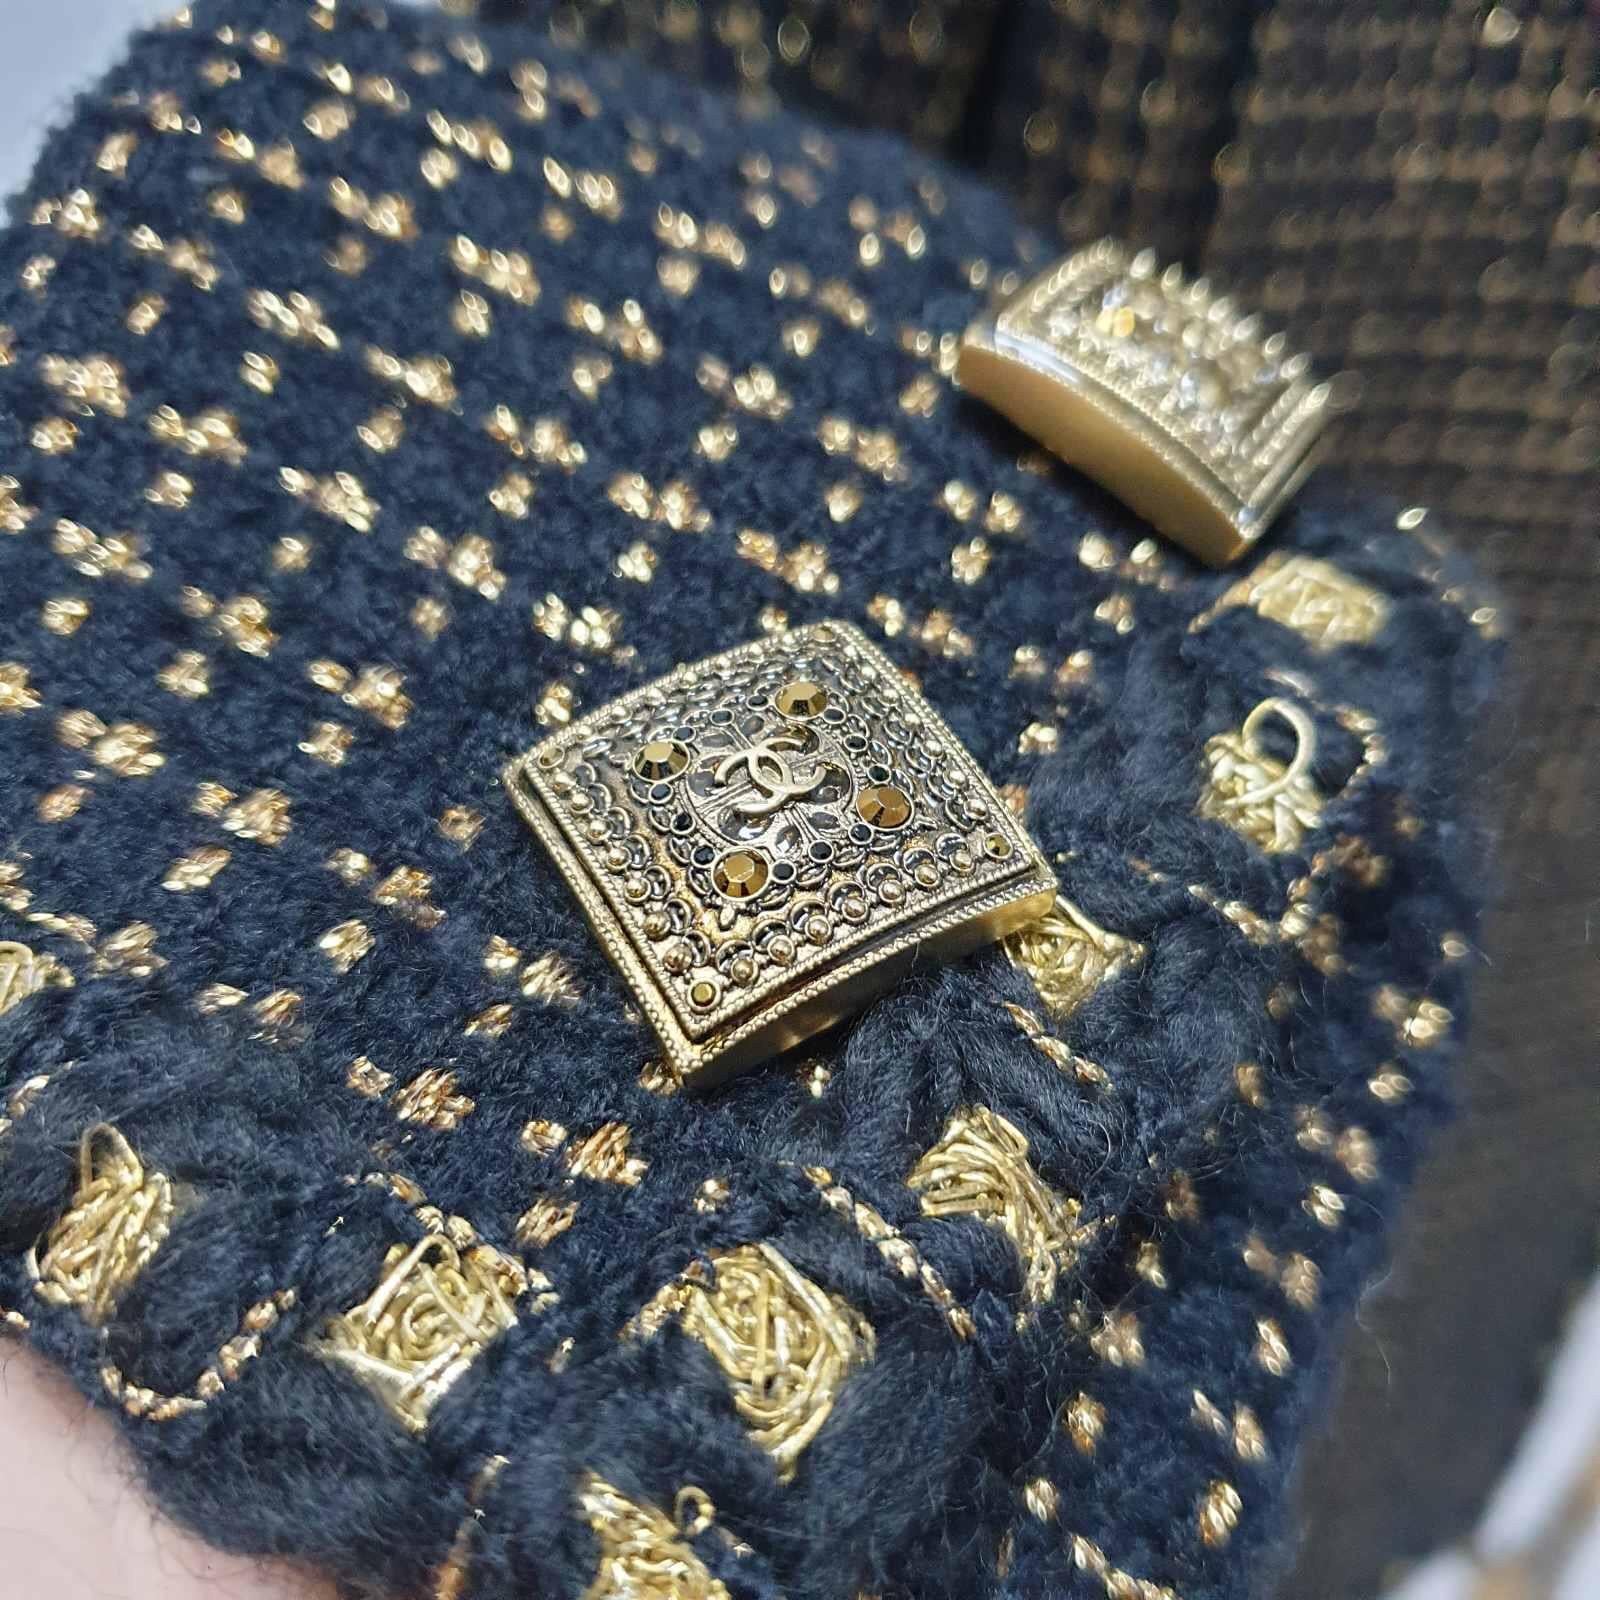 Chanel UNIQUE MOST WANTED LESAGE Black and Metallic Gold Tweed Jacket Coat with Braided Confetti Gold trim, notched collar, two front pockets at waist, 6 Gripoix CC logo at front, sleeves with 10 Gripoix buttons at sleeves (5 each sleeve), 2 Gripoix